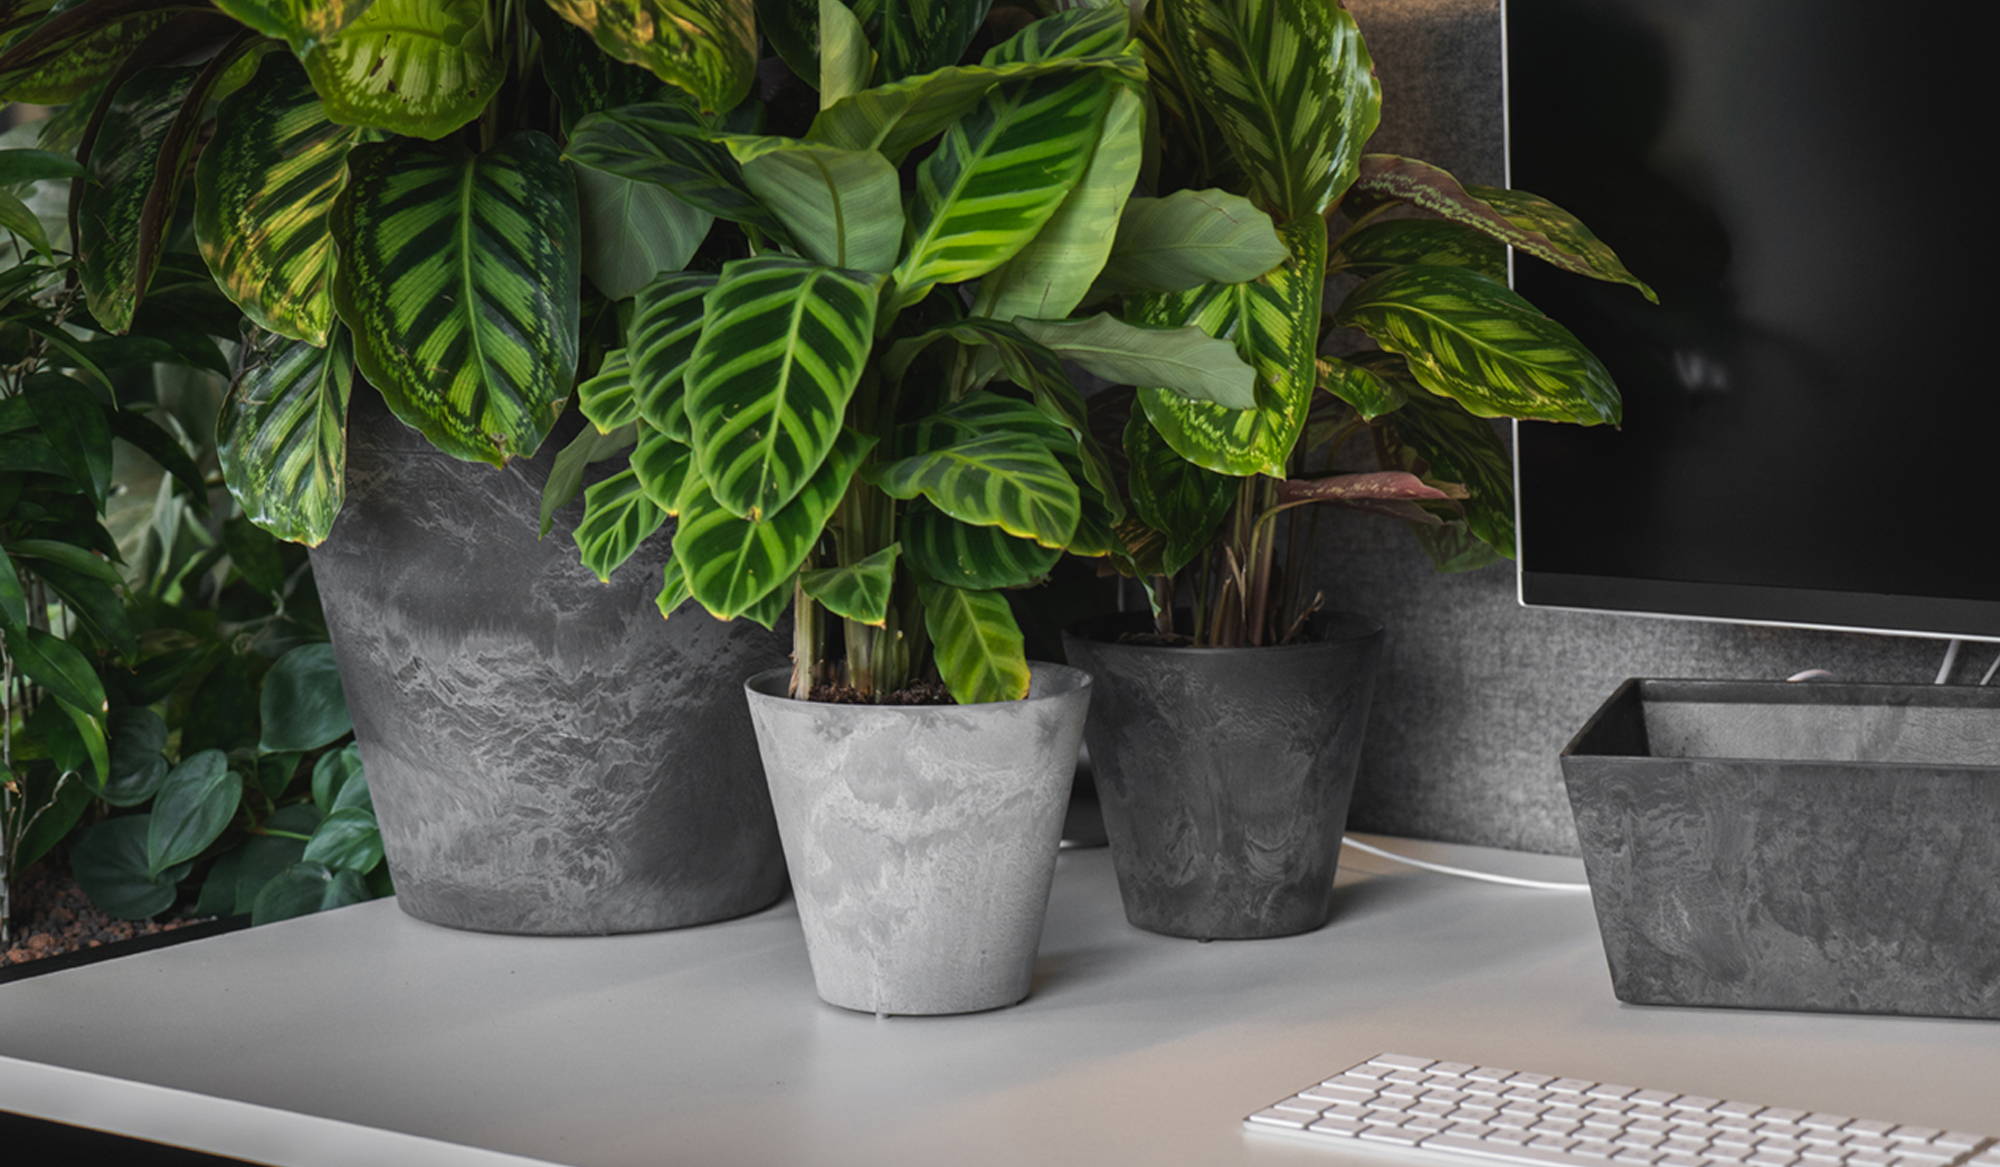 Several planters next to a computer on an office desk